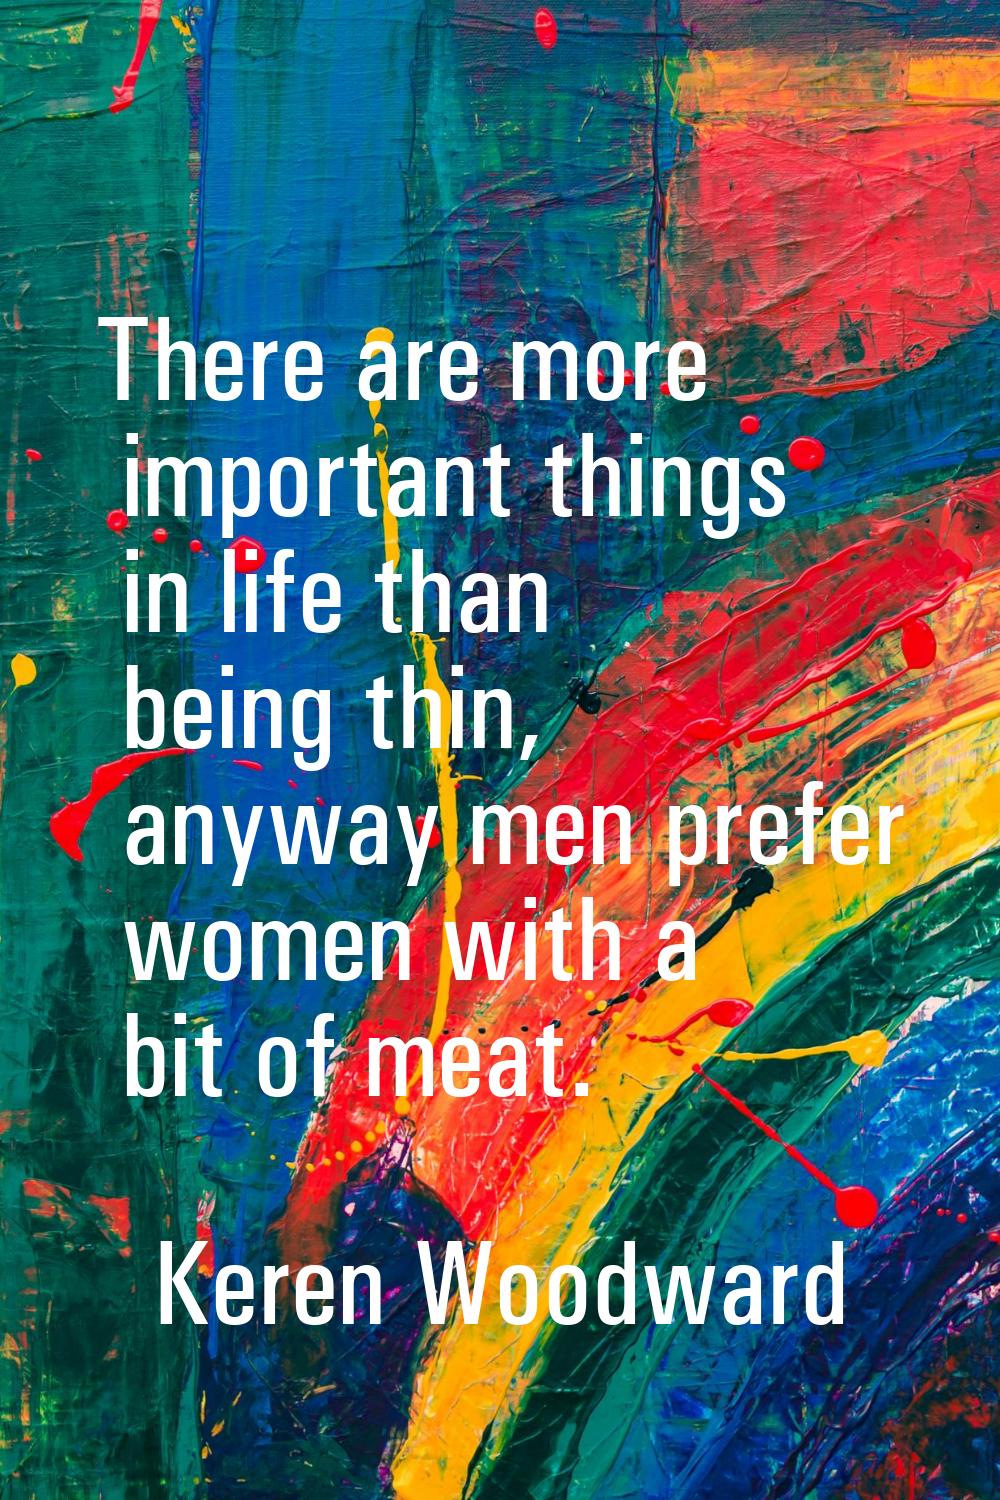 There are more important things in life than being thin, anyway men prefer women with a bit of meat